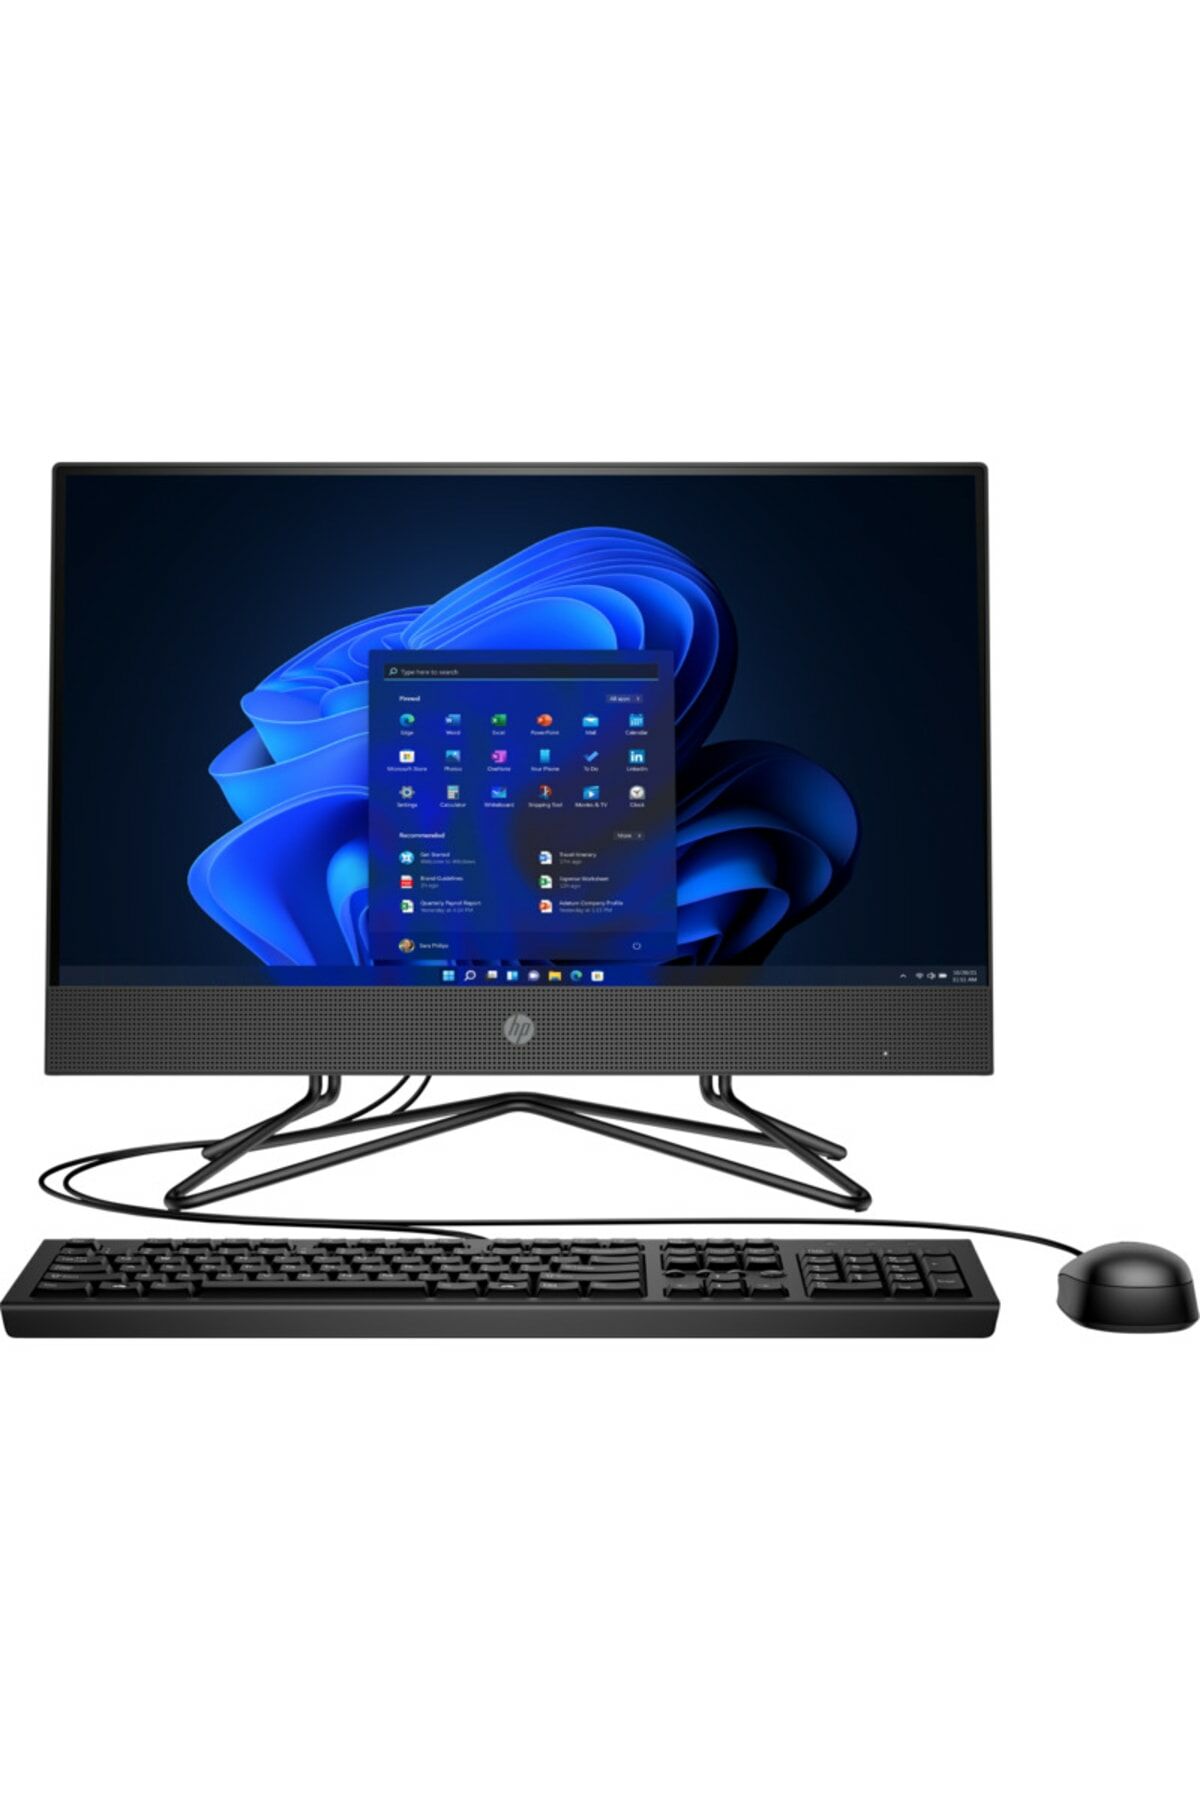 HP 200 G4 I3-10110u 8 Gb 512 Gb M.2 W10 Pro 295d4ea07 Uhd Graphics 21.5'' Fhd All In One Pc